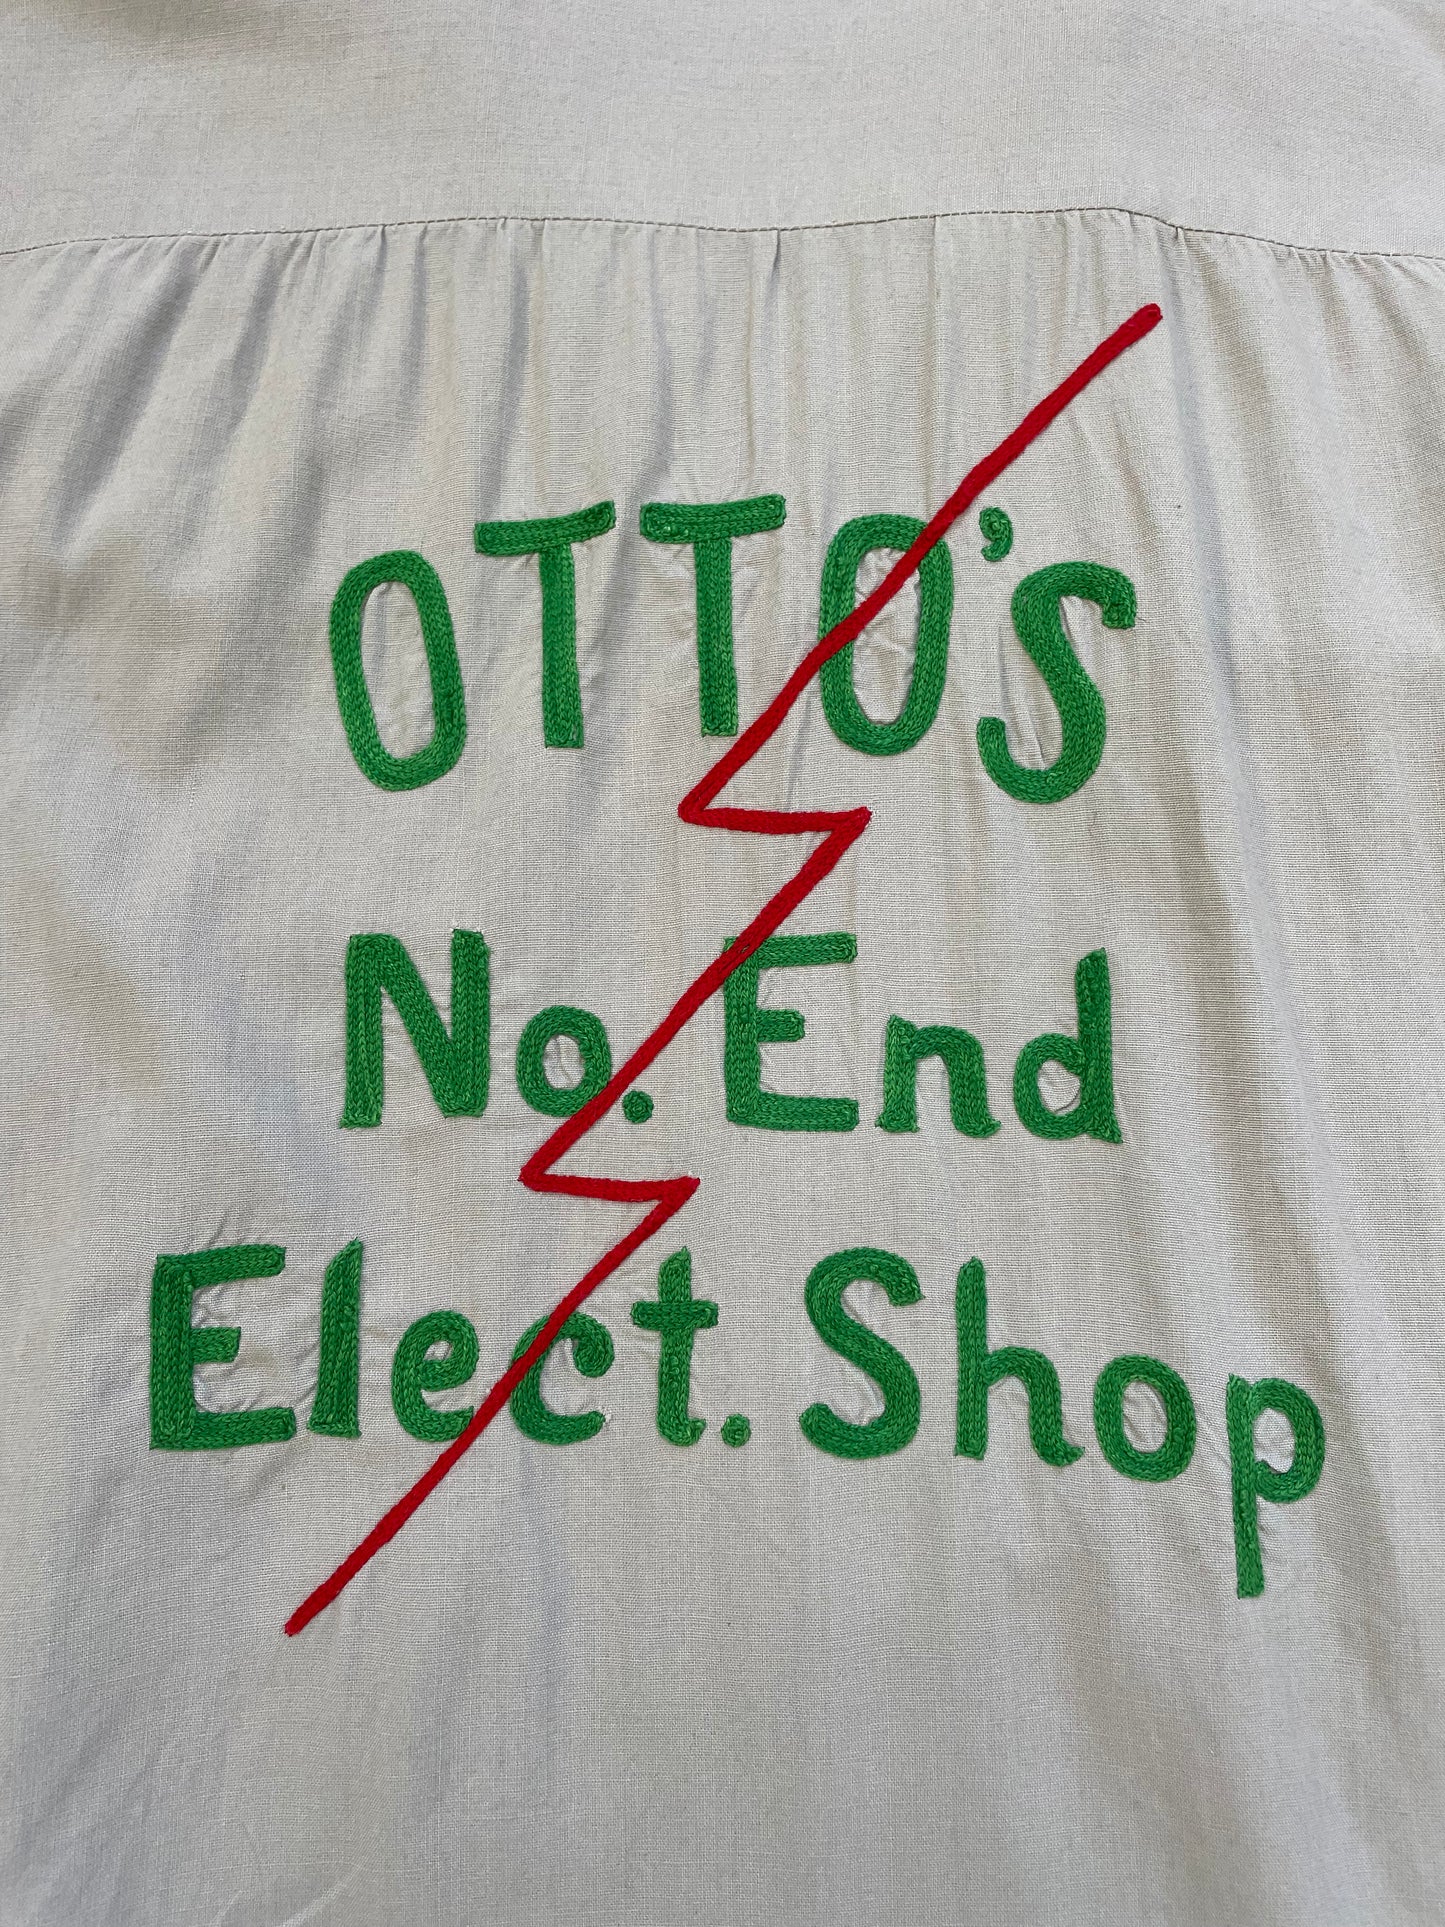 Otto’s North End Electric Shop Bowling Shirt